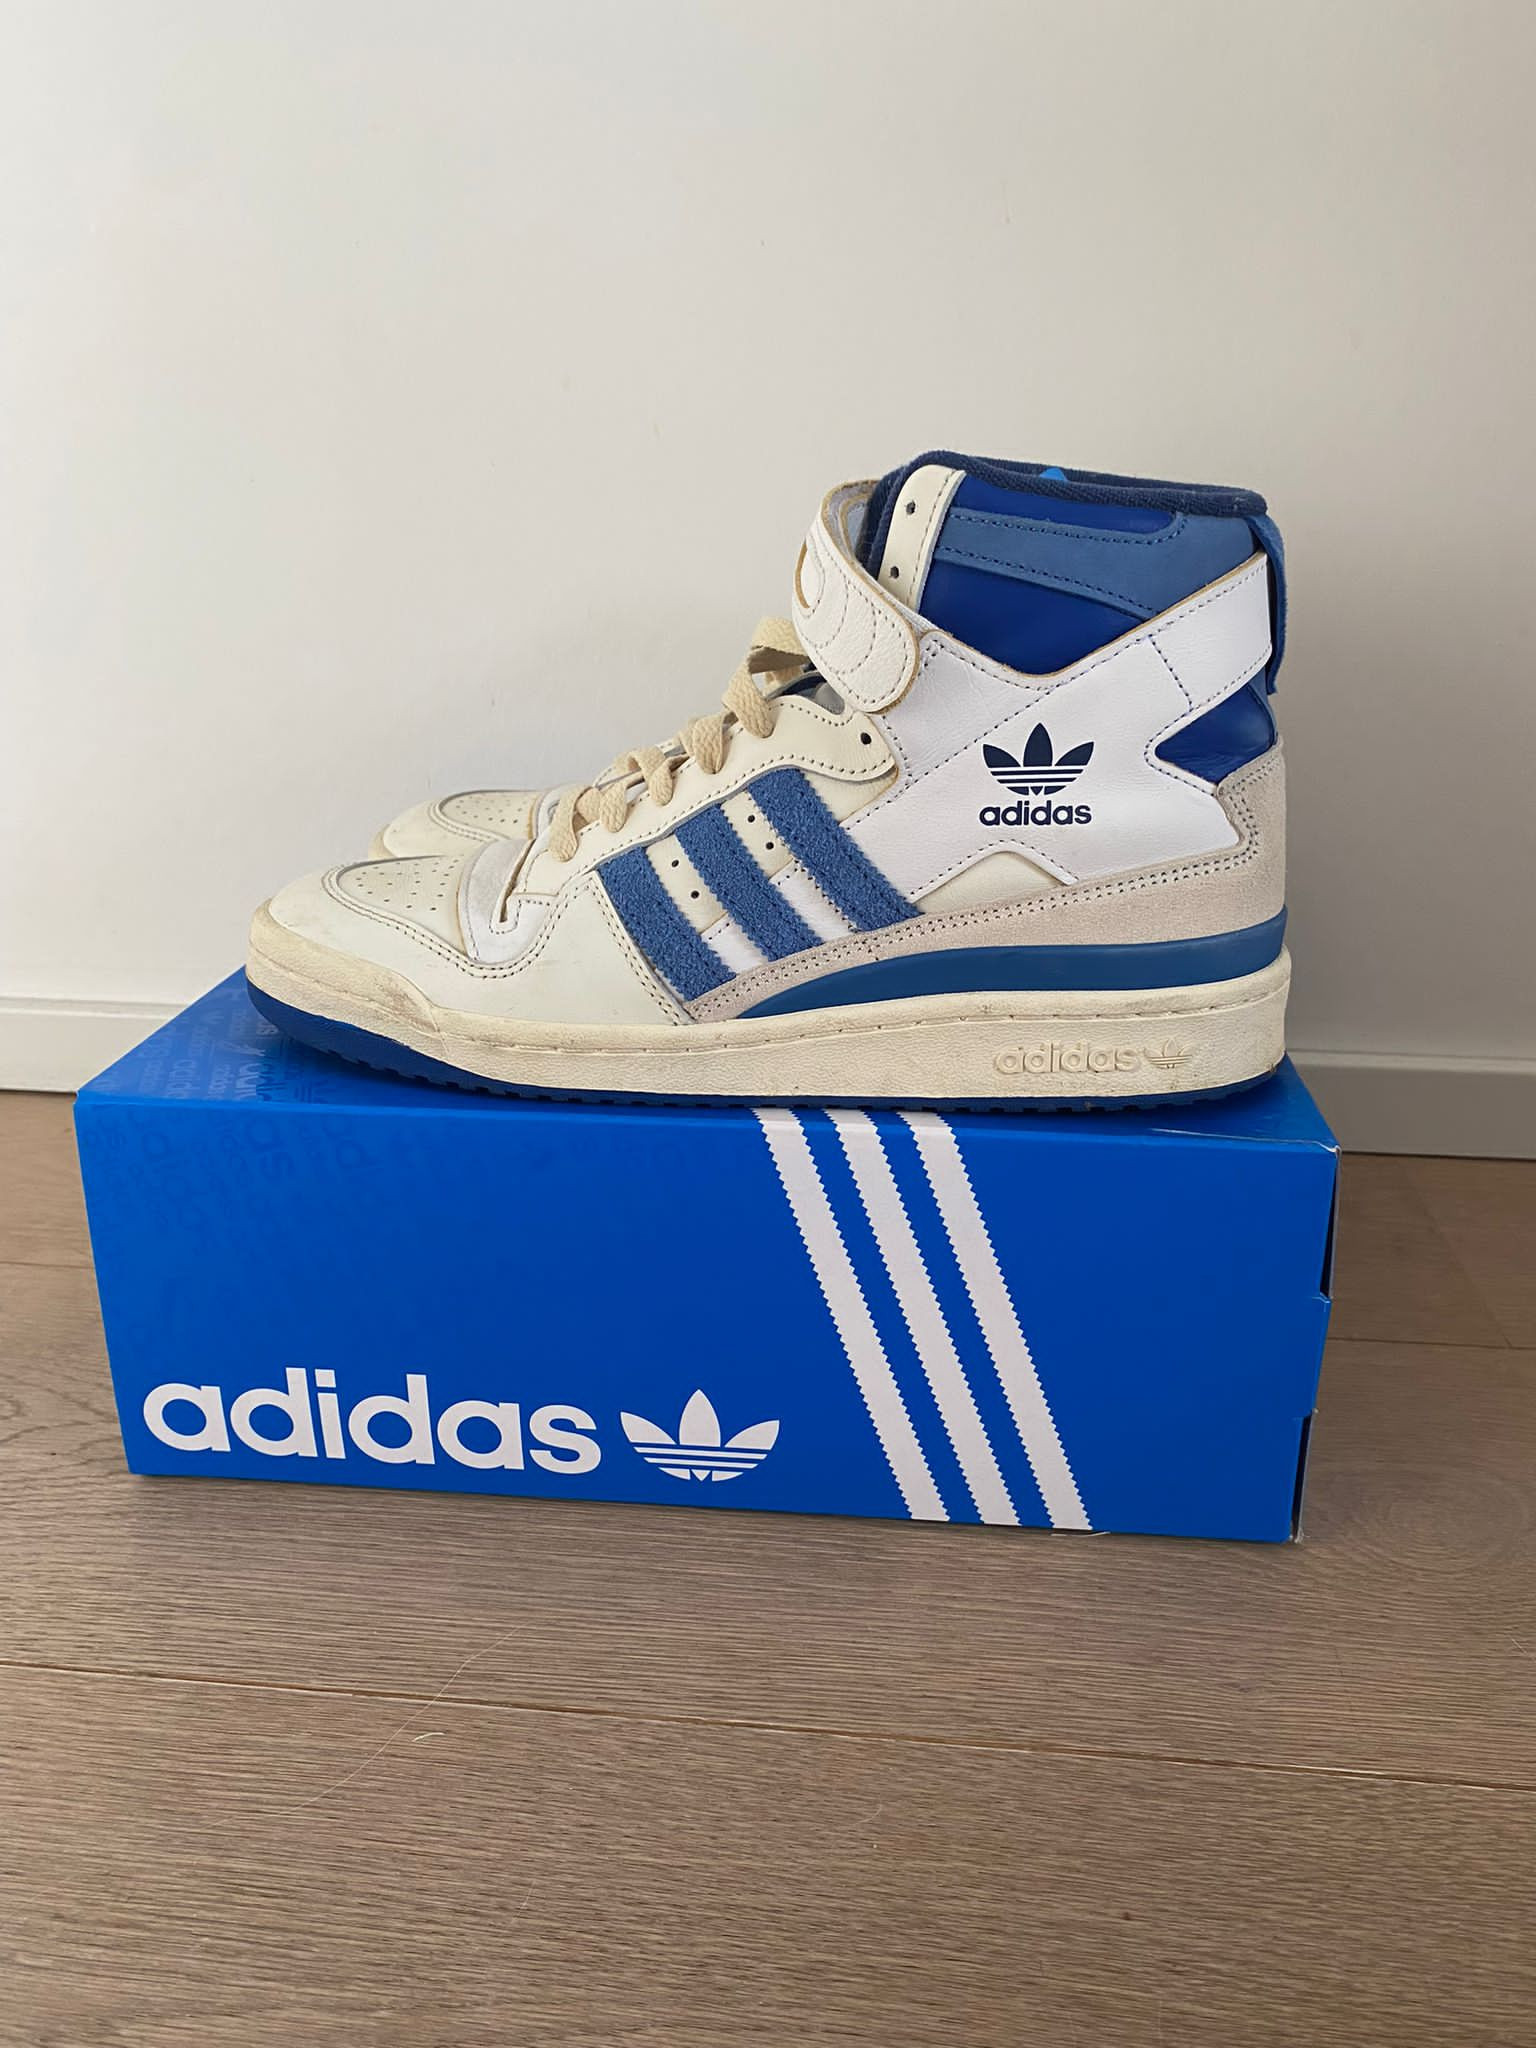 Adidas Forum Mid Sneakers Size 42.5